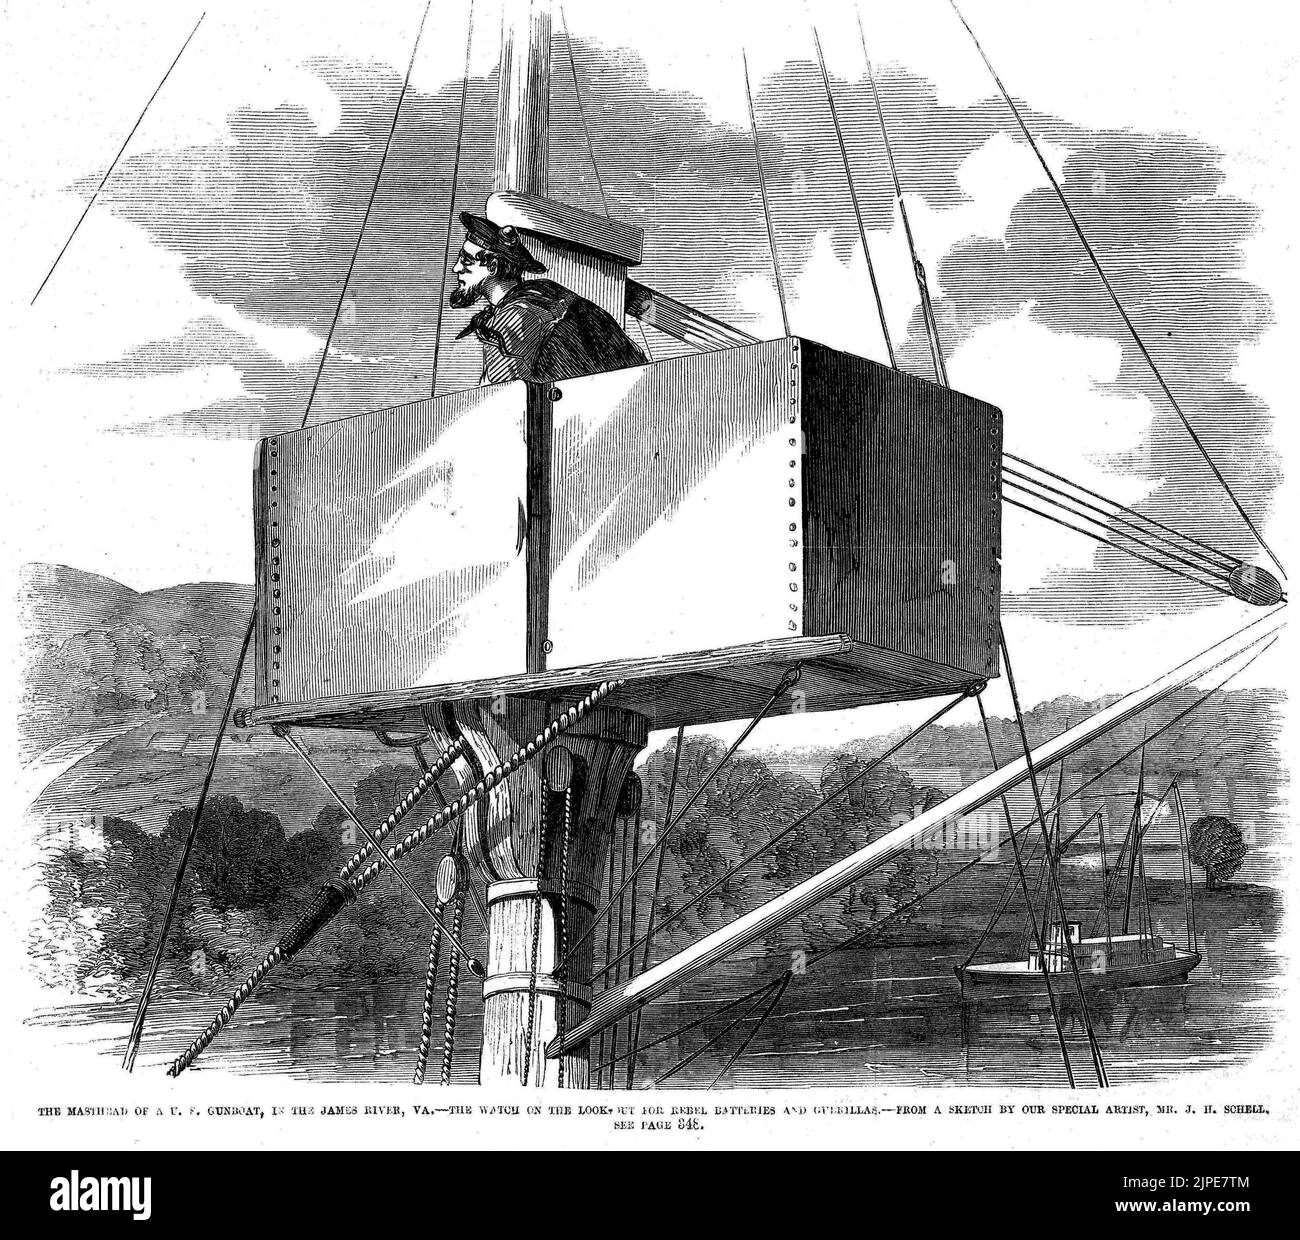 The Masthead of a U. S. Gunboat, in the James River, Virginia - The Watch on the Lookout for Rebel Batteries and Guerillas (1862) American Civil War illustration by J. H. Schell from Frank Leslie's Illustrated Newspaper Stock Photo